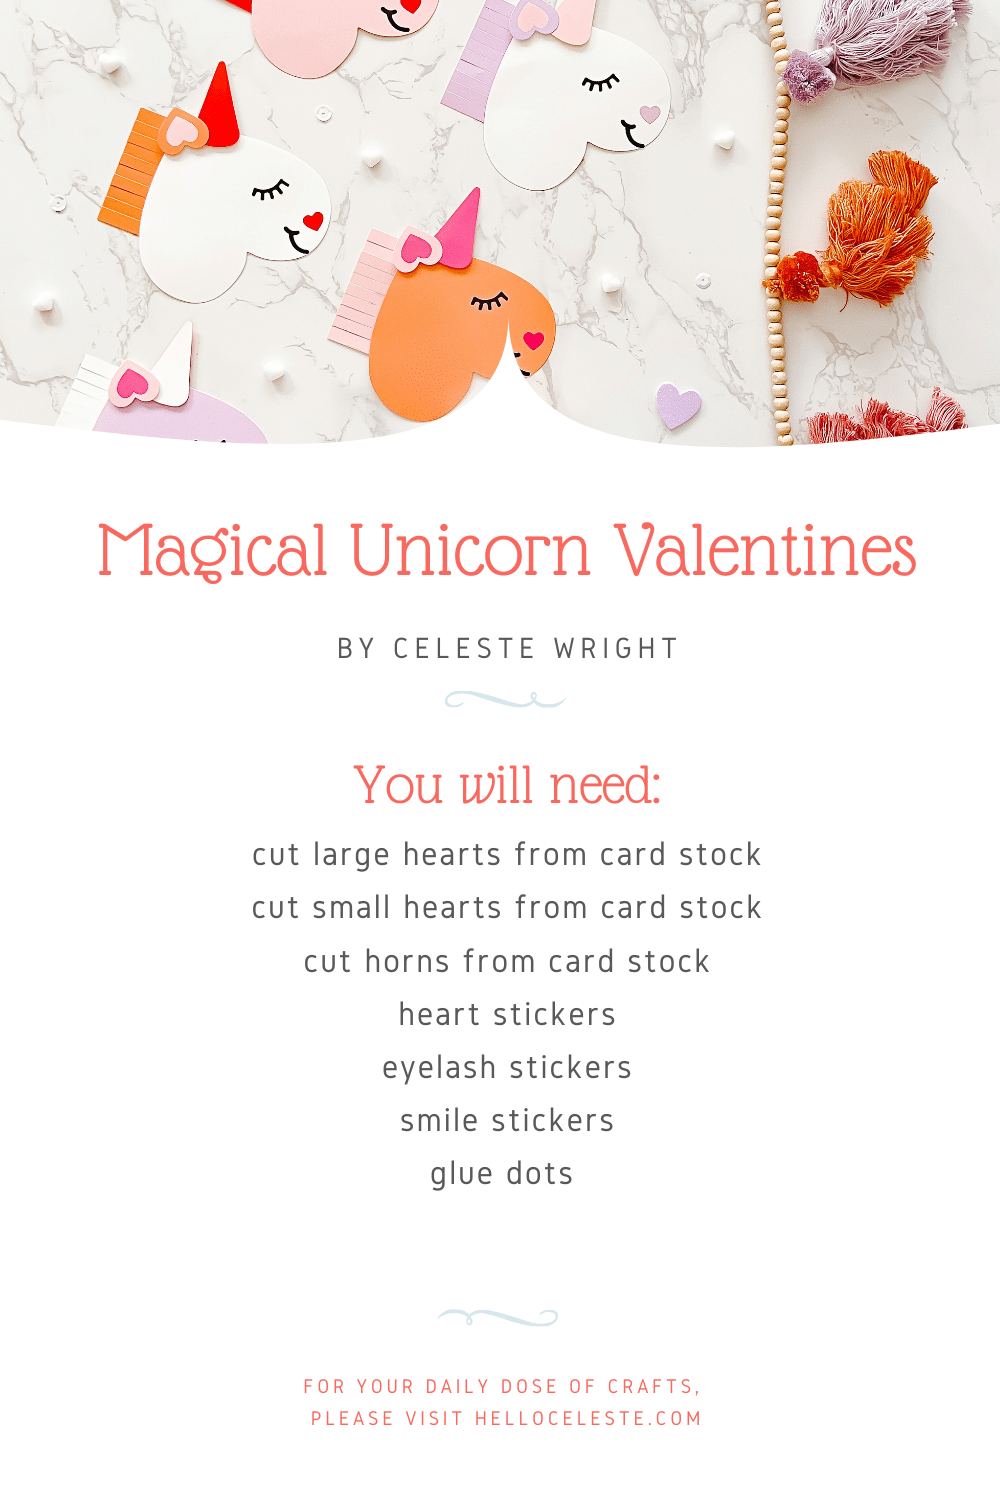 How To Surprise The Unicorn Lover In Your Life